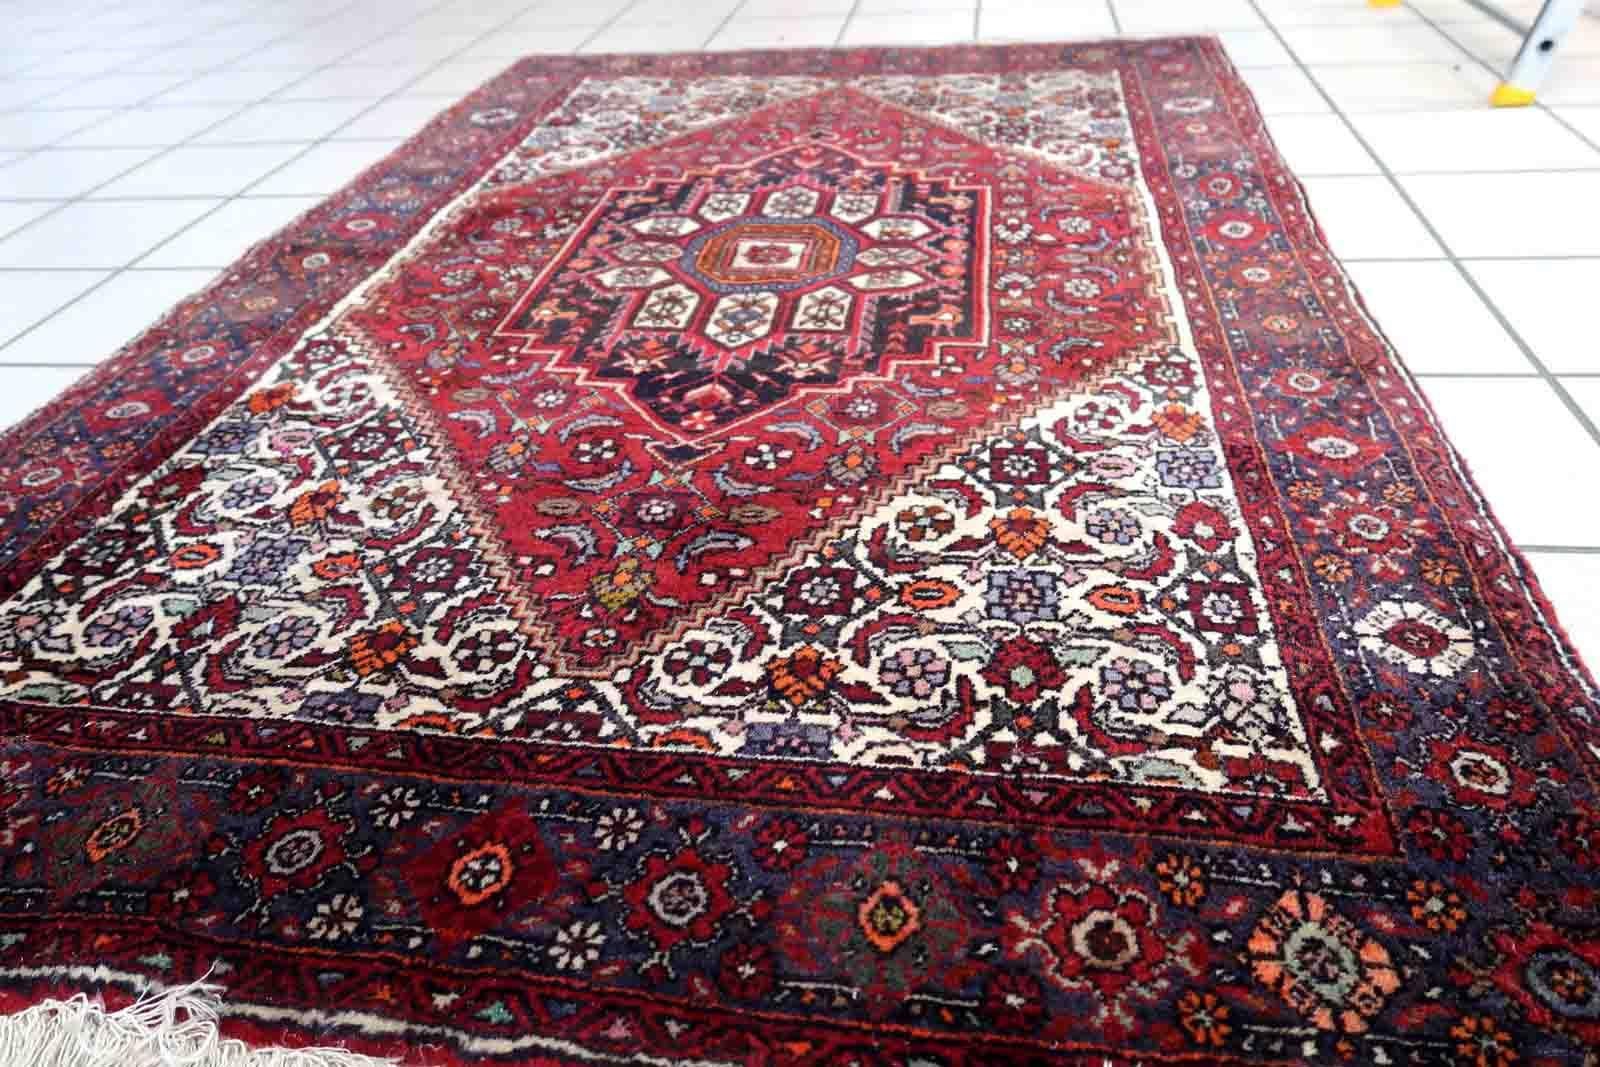 Handmade vintage Bidjar woolen rug. The rug is from the end of 20th century, it is in original good condition. The rug is in traditional design with large medallion in the center. The color combination is white and red.

